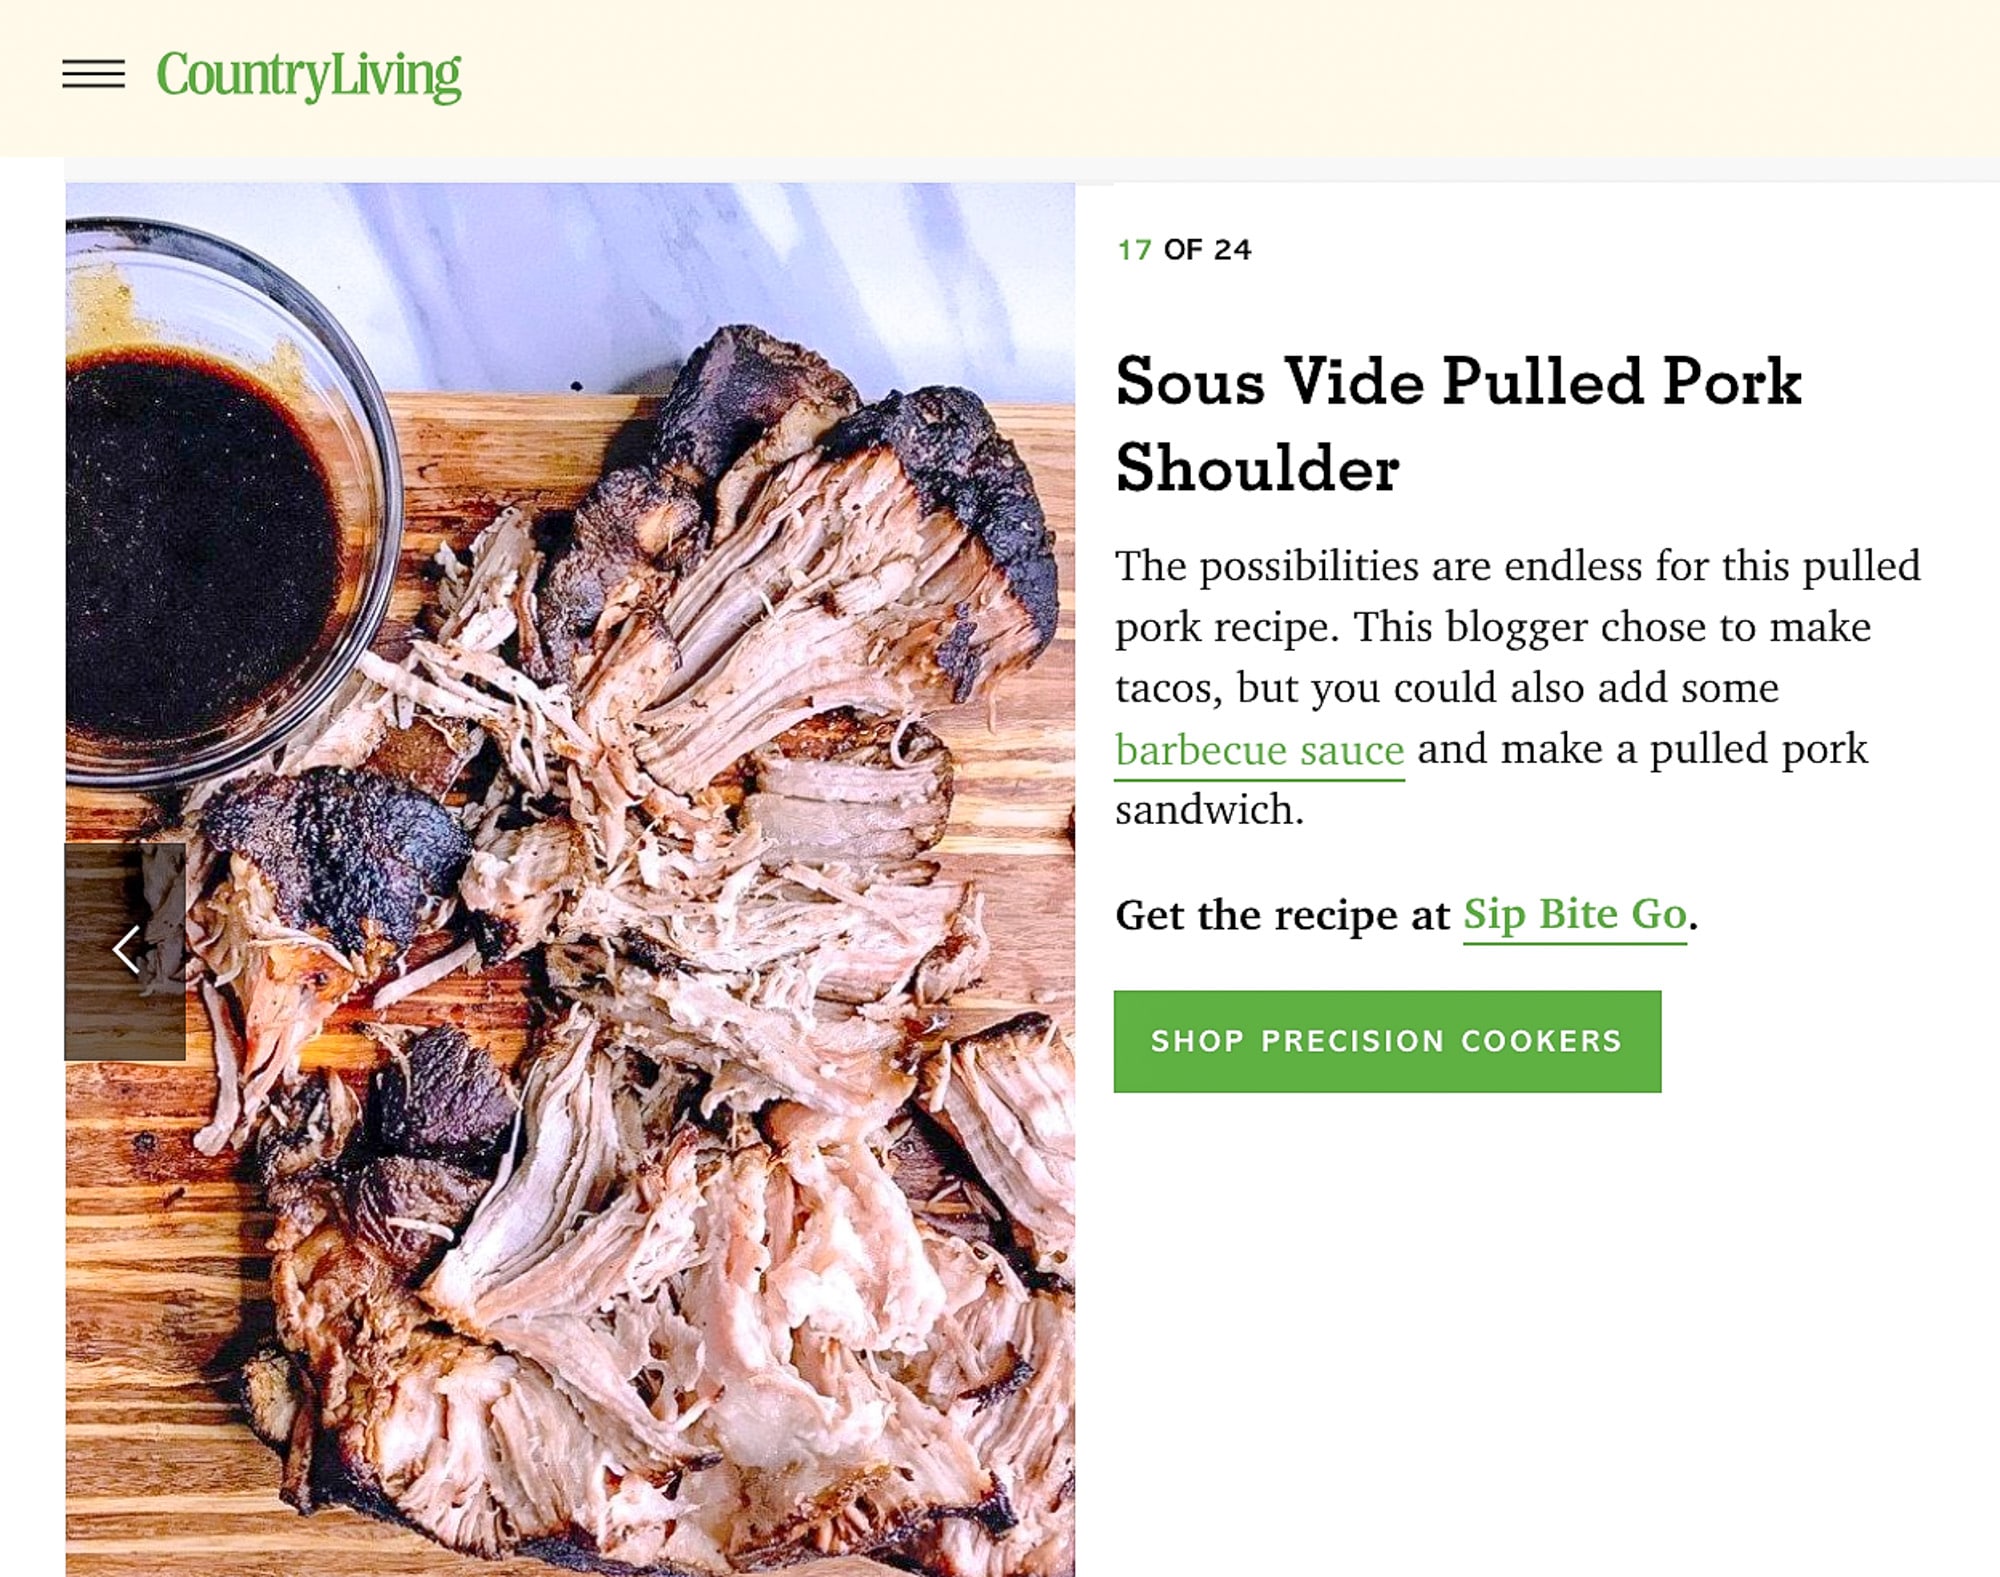 sous vide pulled pork shoulder recipe featured on Country Living